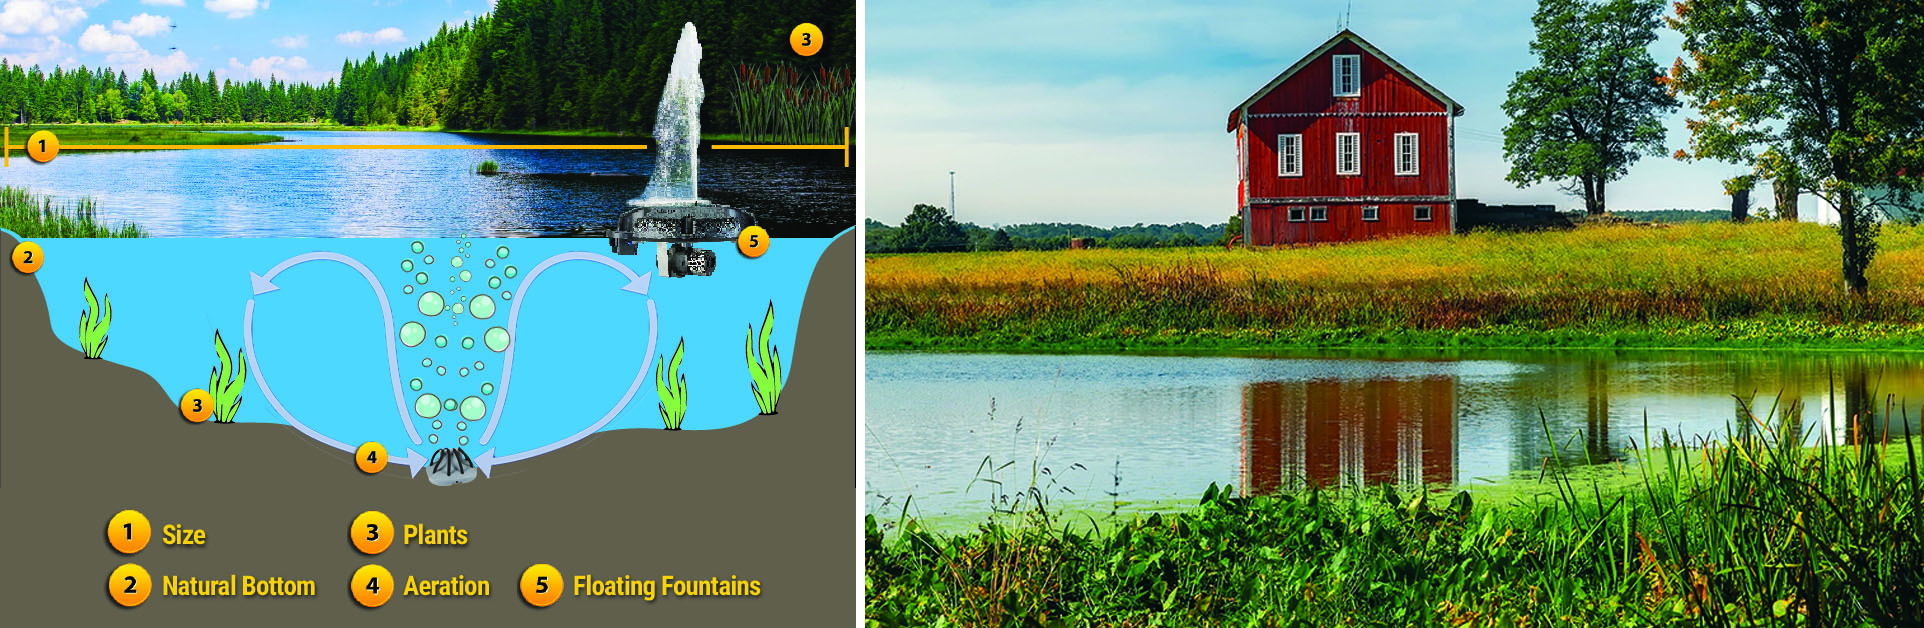 Learn what an earthen bottom pond is (lake) and how to maintain it.